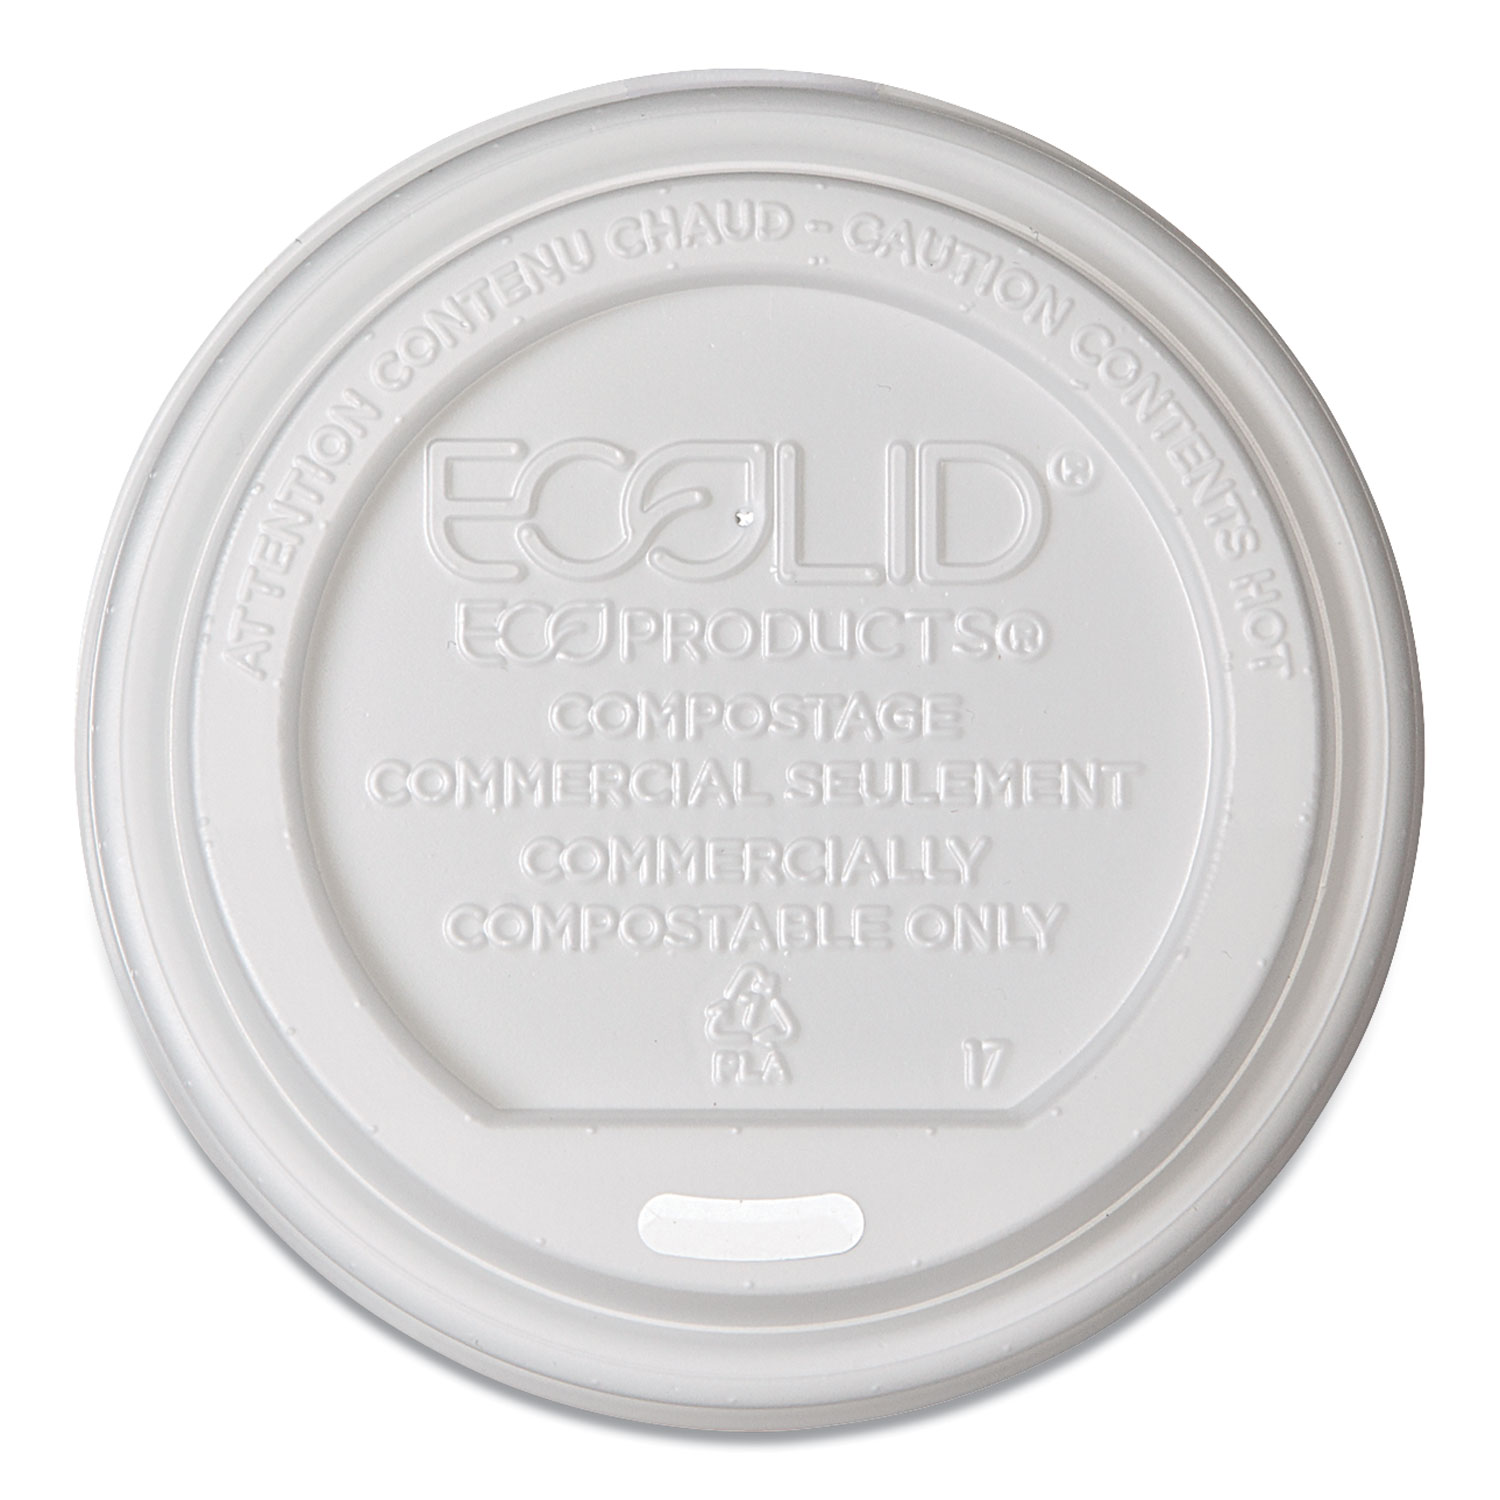  Eco-Products EP-ECOLID-8 EcoLid Renewable/Compostable Hot Cup Lids, PLA Fits 8 oz Hot Cups, 50/Packs, 16 Packs/Carton (ECOEPECOLID8) 